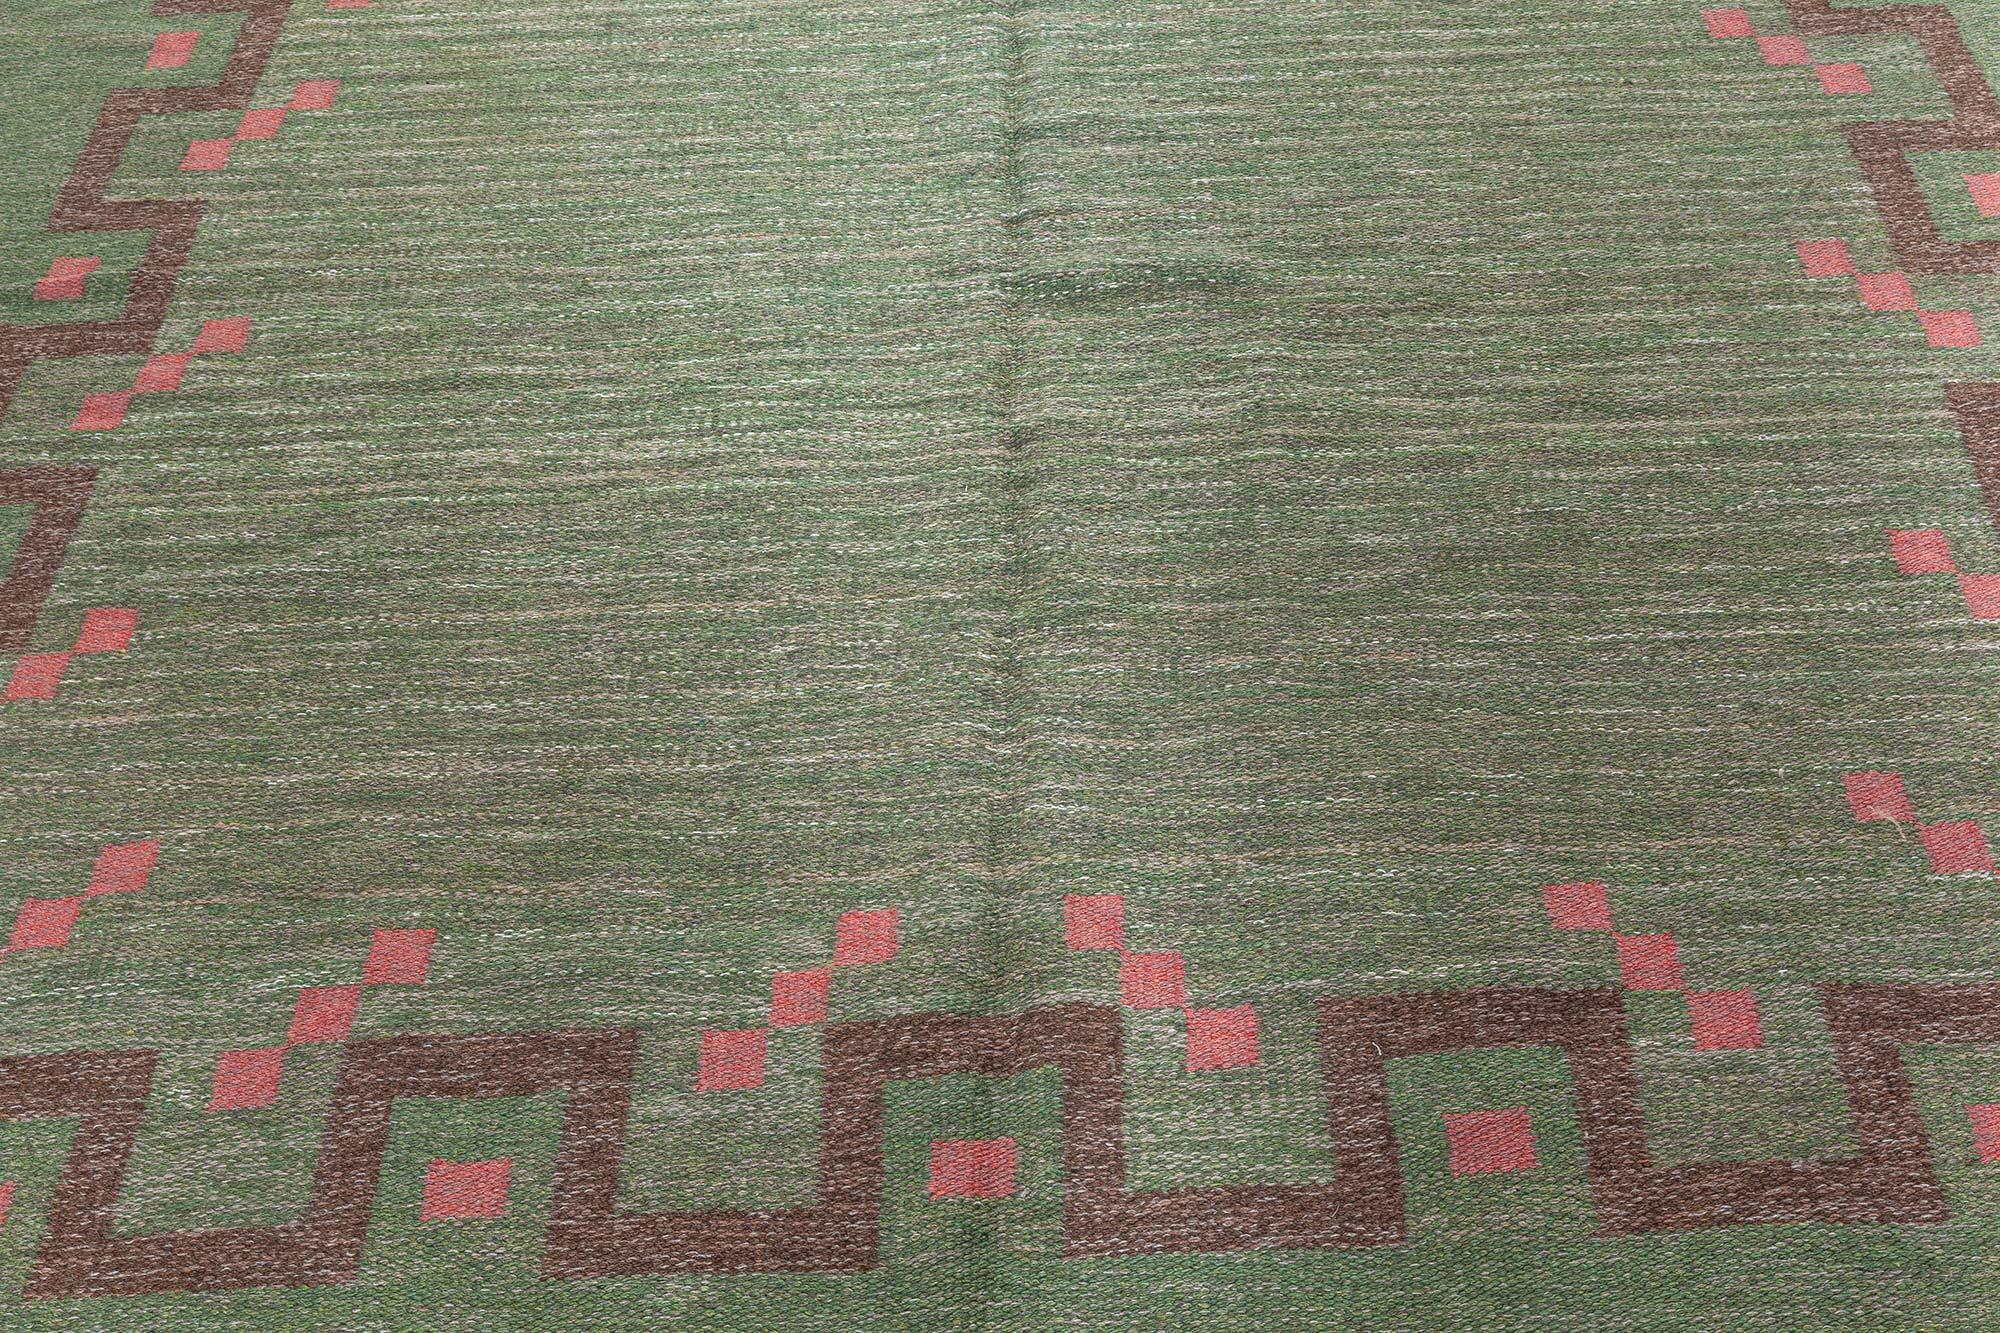 Mid-20th Century Swedish Green, Coral Red handmade wool rug by Ellen Stahlbrand
Size: 7'5